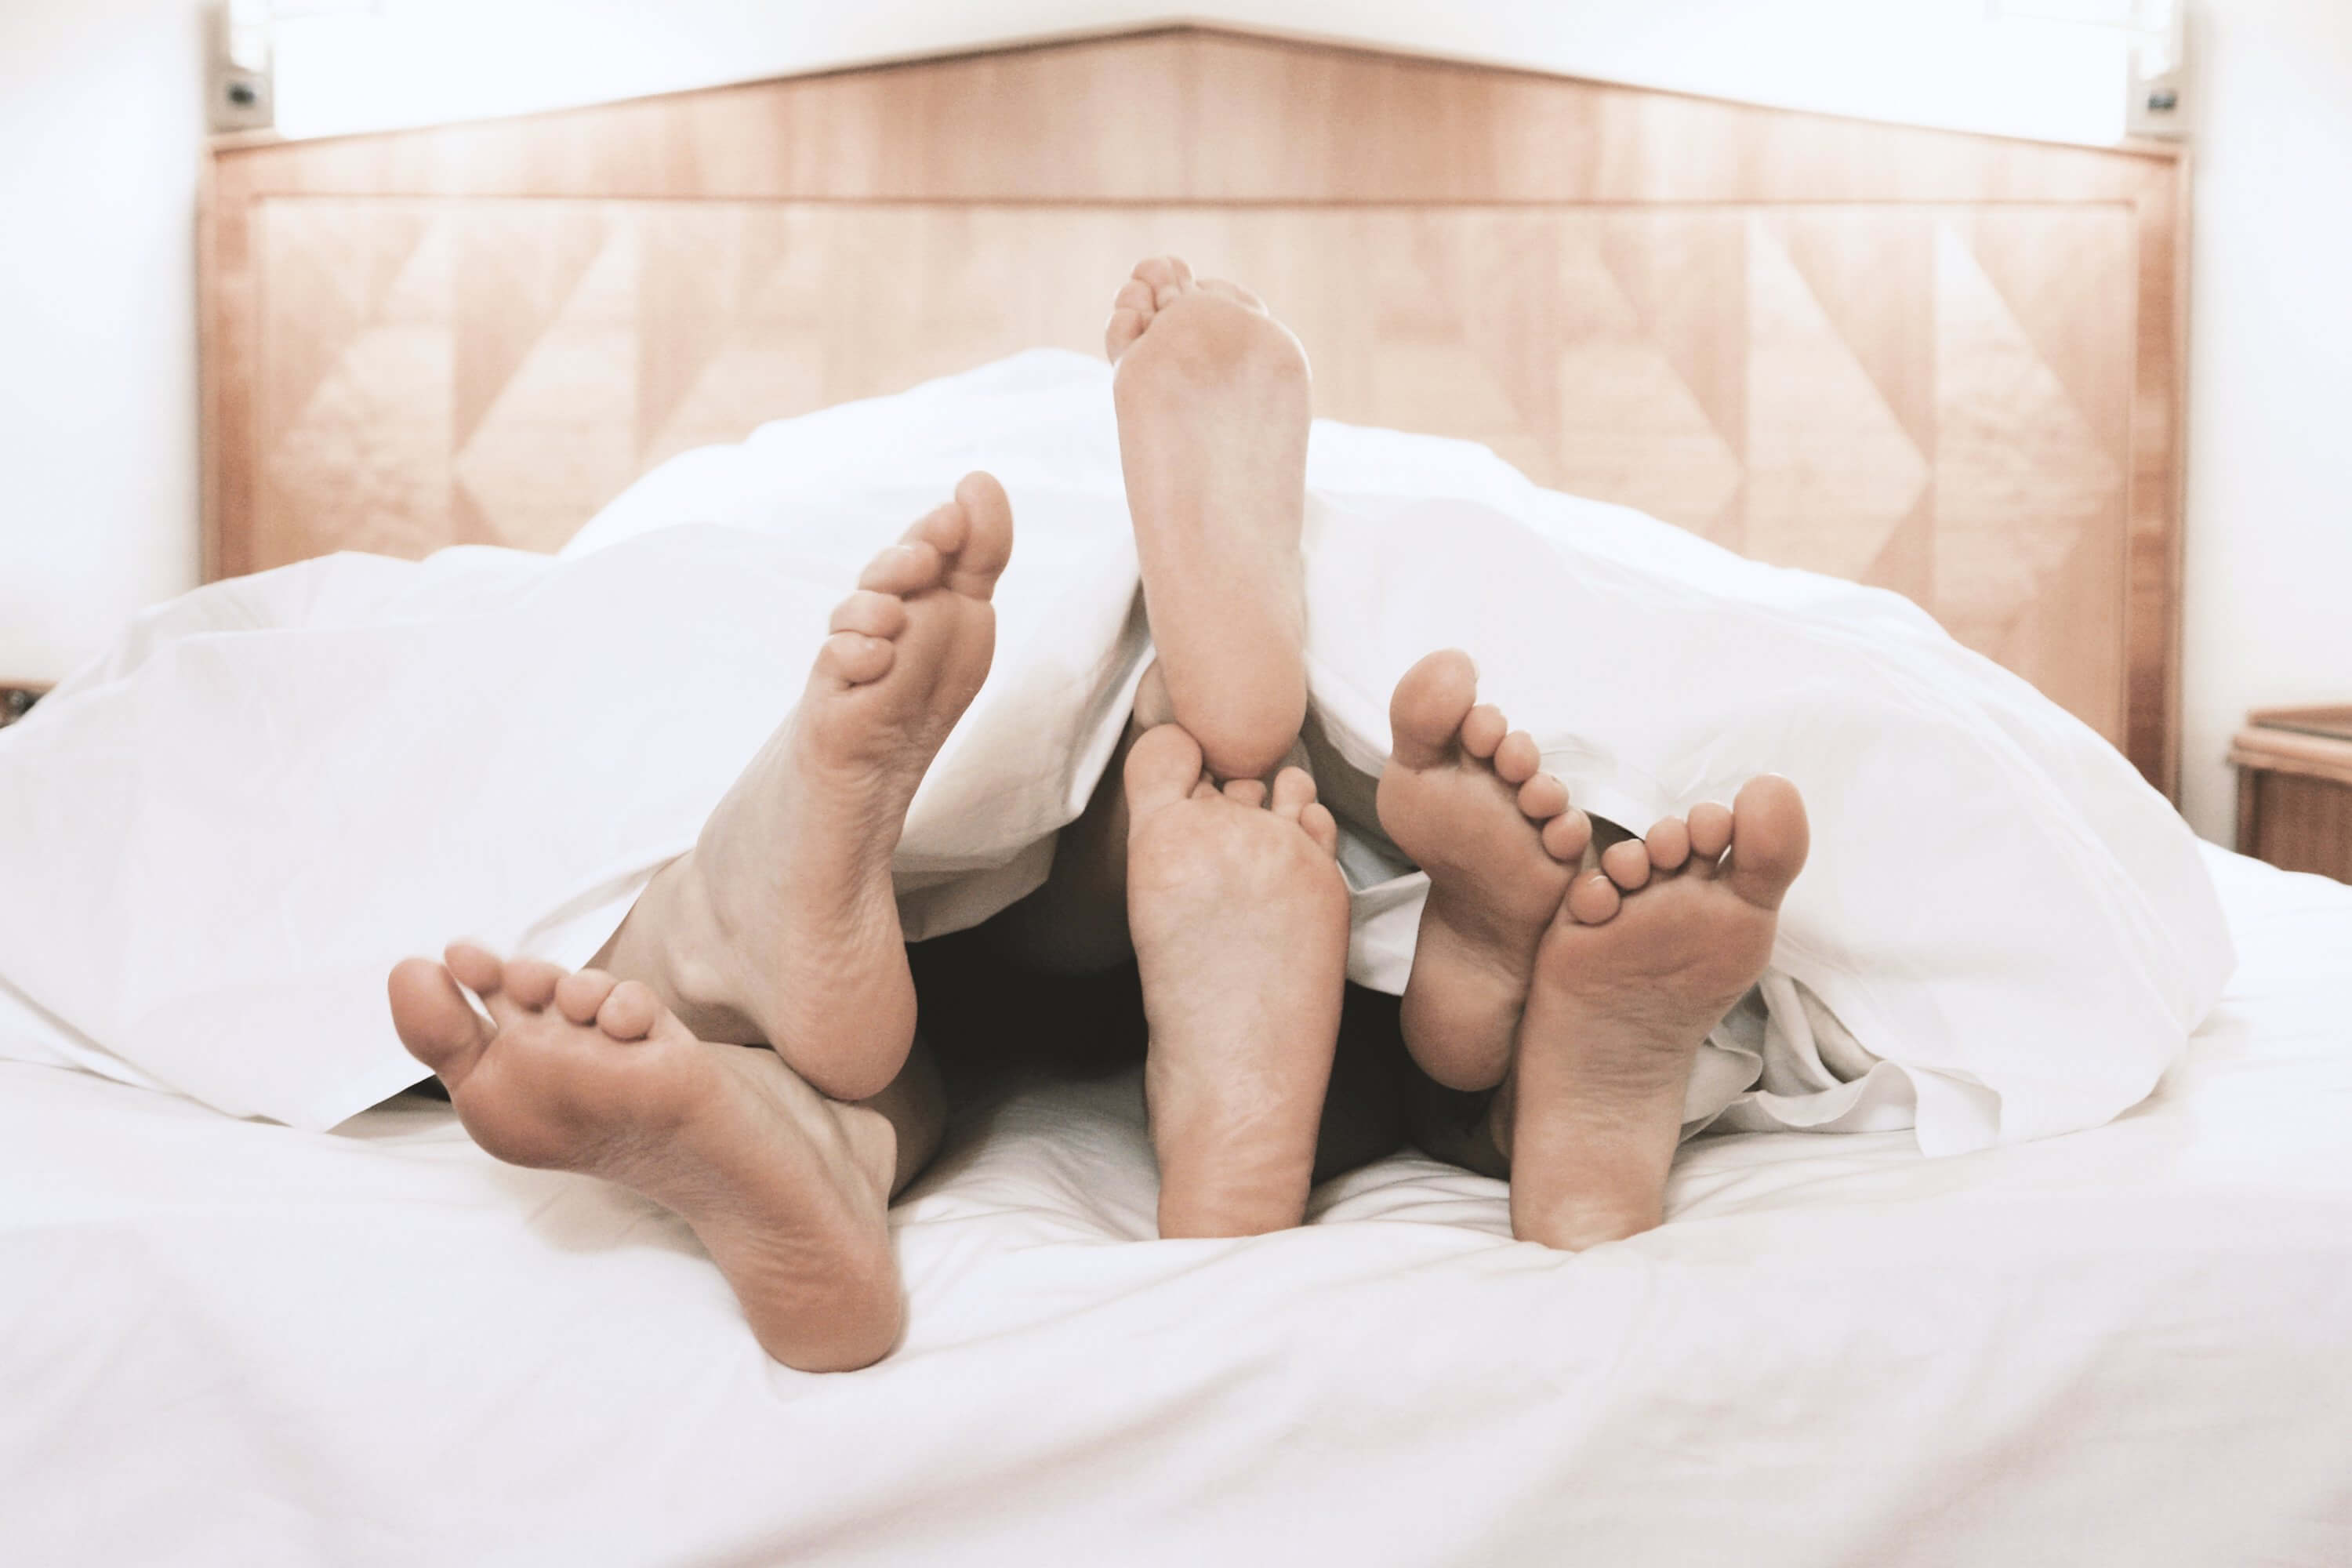 What Its Really Like To Have a Threesome MysteryVibe